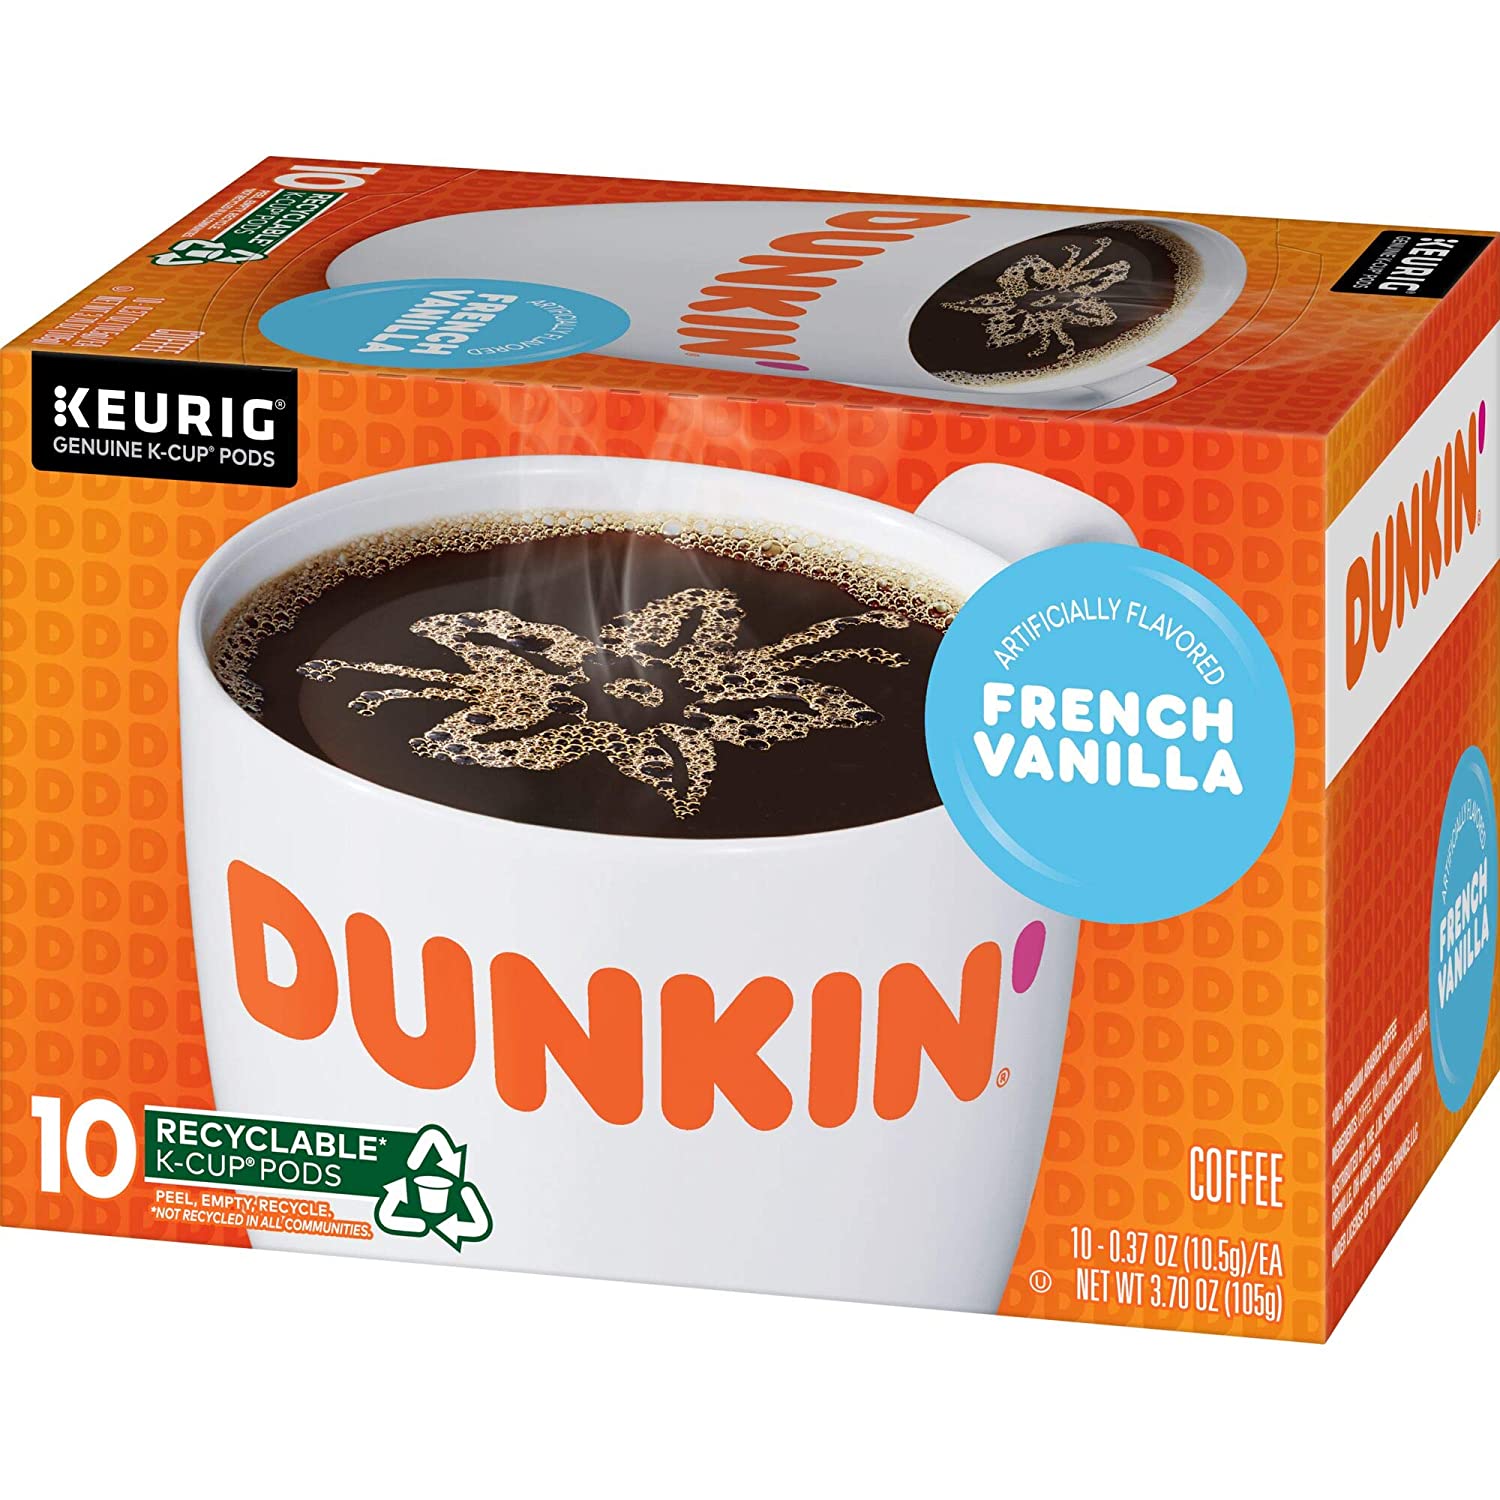 Dunkin' French Vanilla Flavored Coffee K-Cup Pods 3.7 OZ